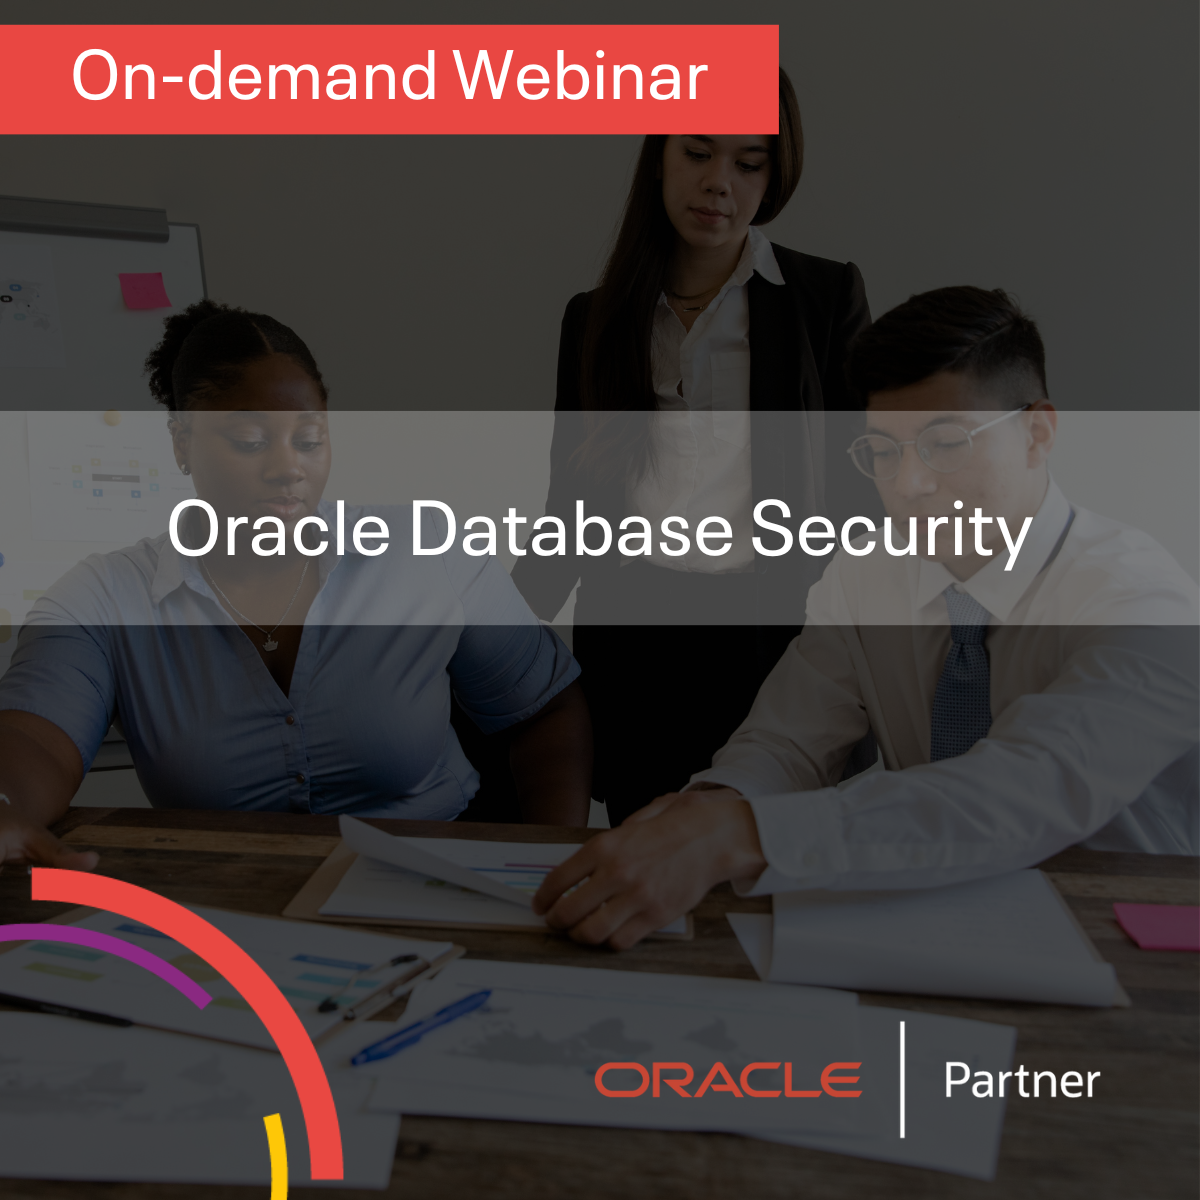 Oracl-Database-Security-On-Demand-Webinar-cover-image